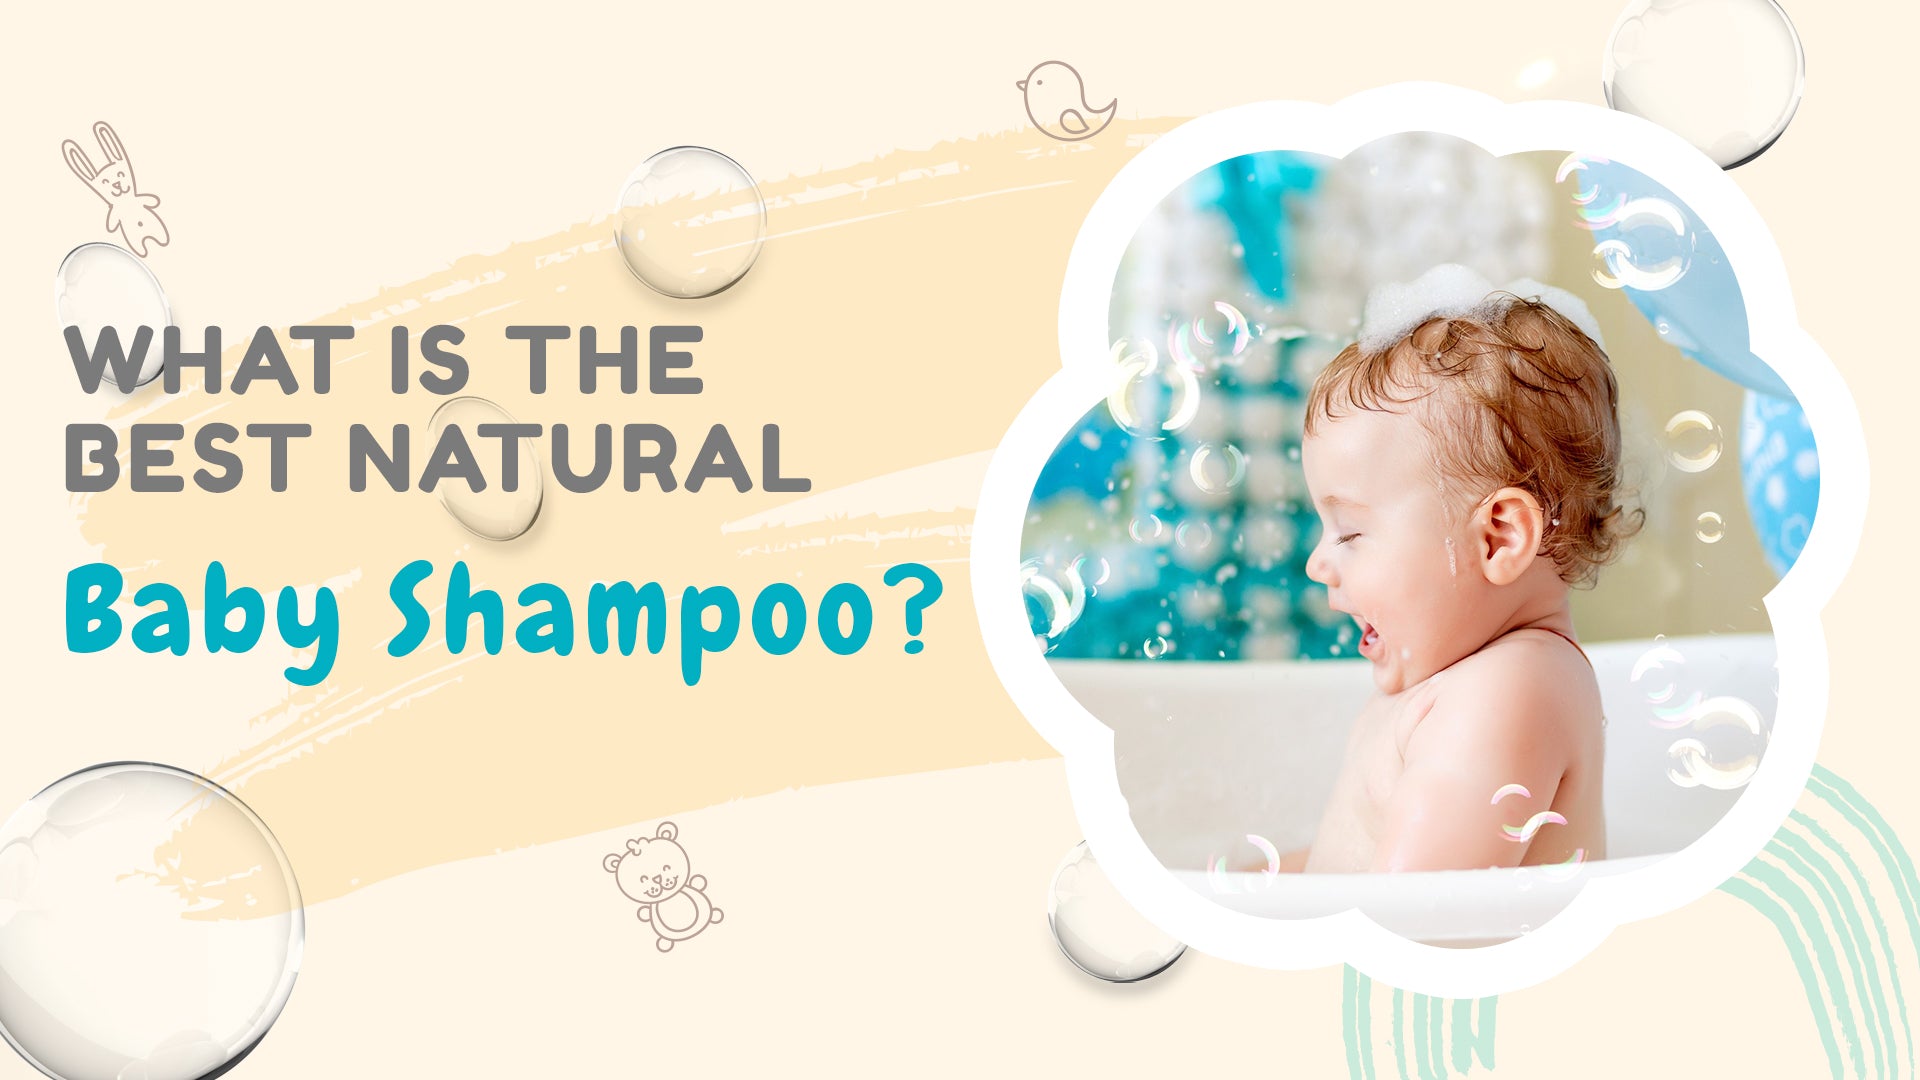 WHAT IS THE BEST NATURAL BABY SHAMPOO?